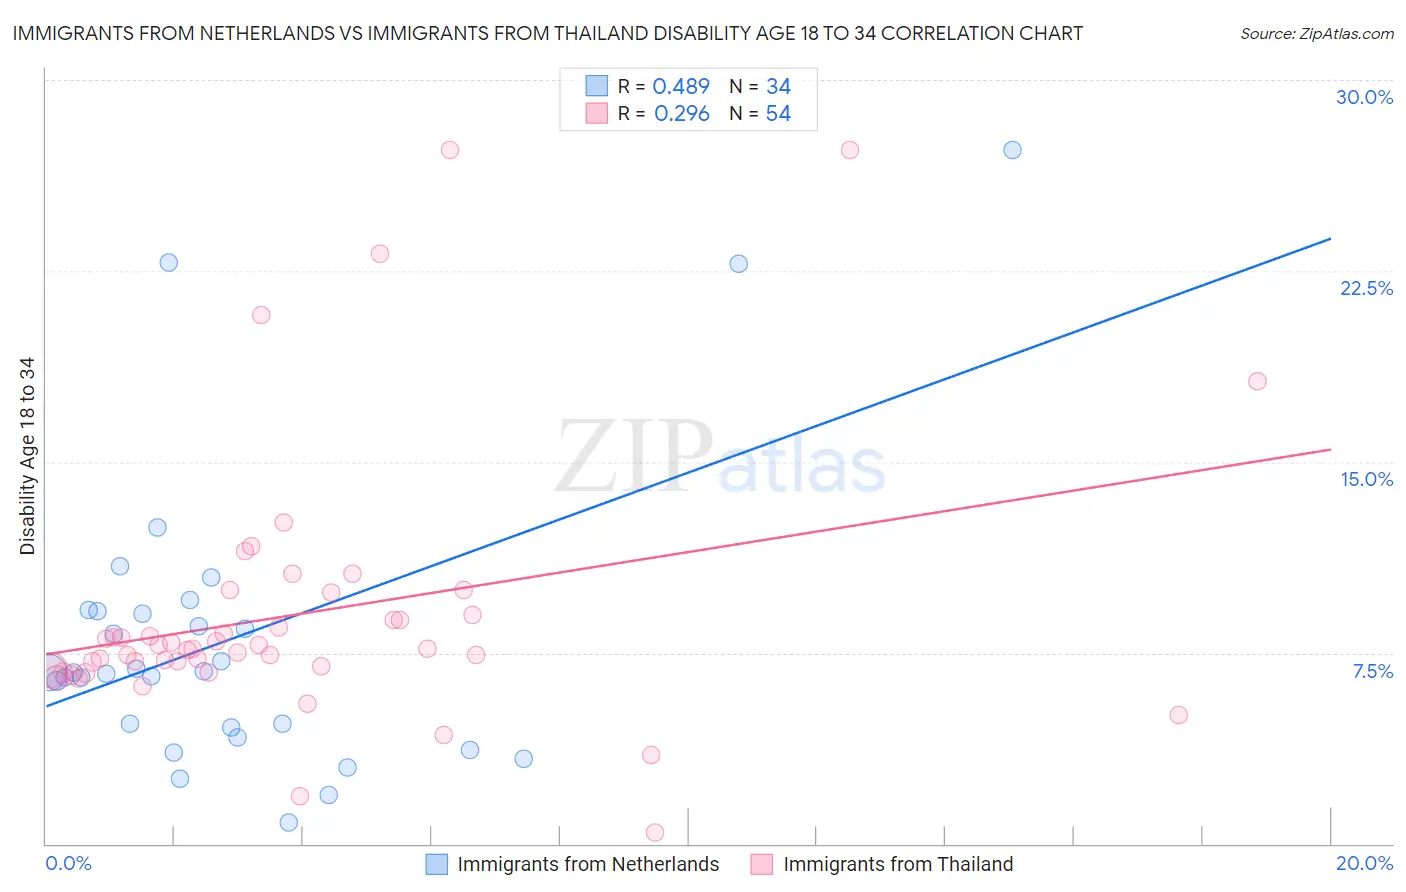 Immigrants from Netherlands vs Immigrants from Thailand Disability Age 18 to 34